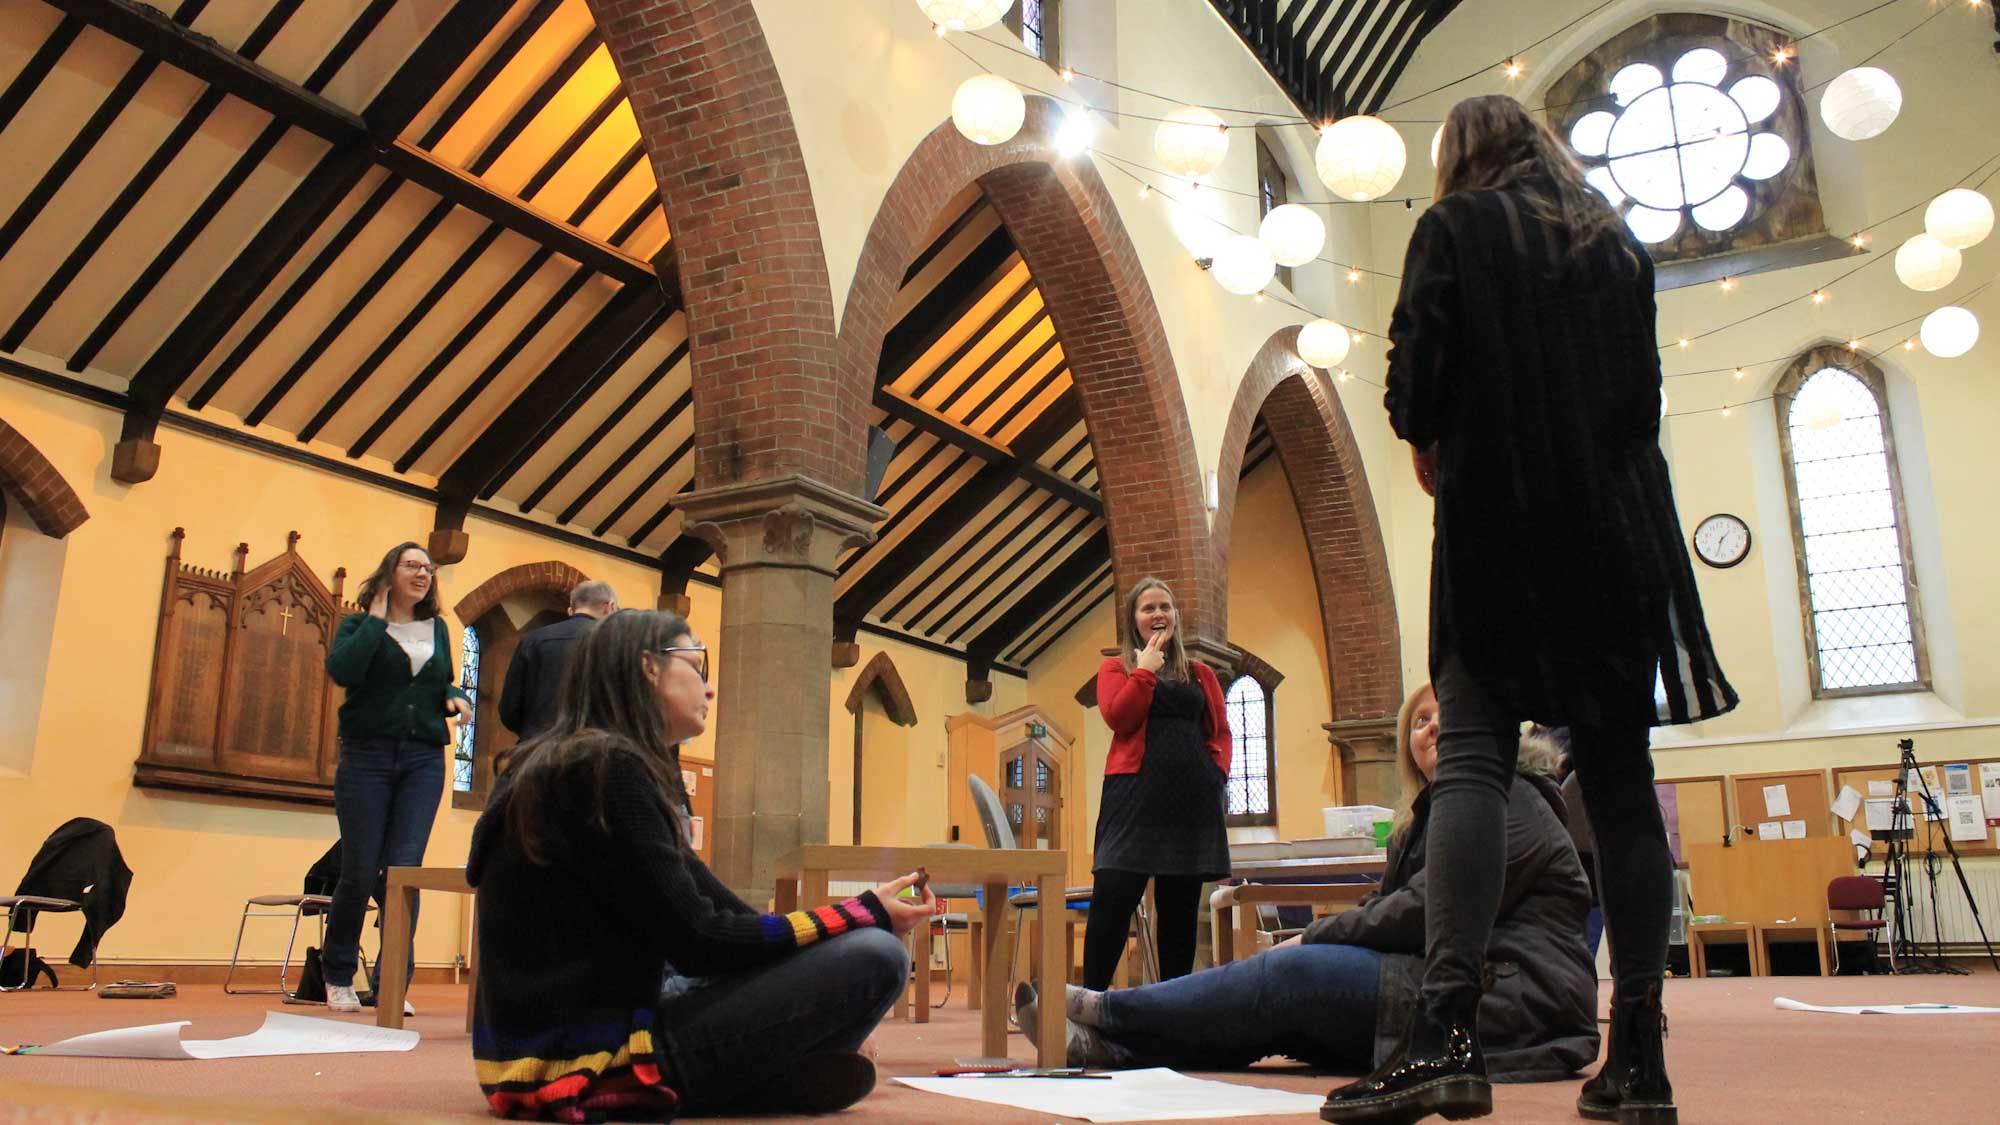 Group of people doing a planning activity in a church